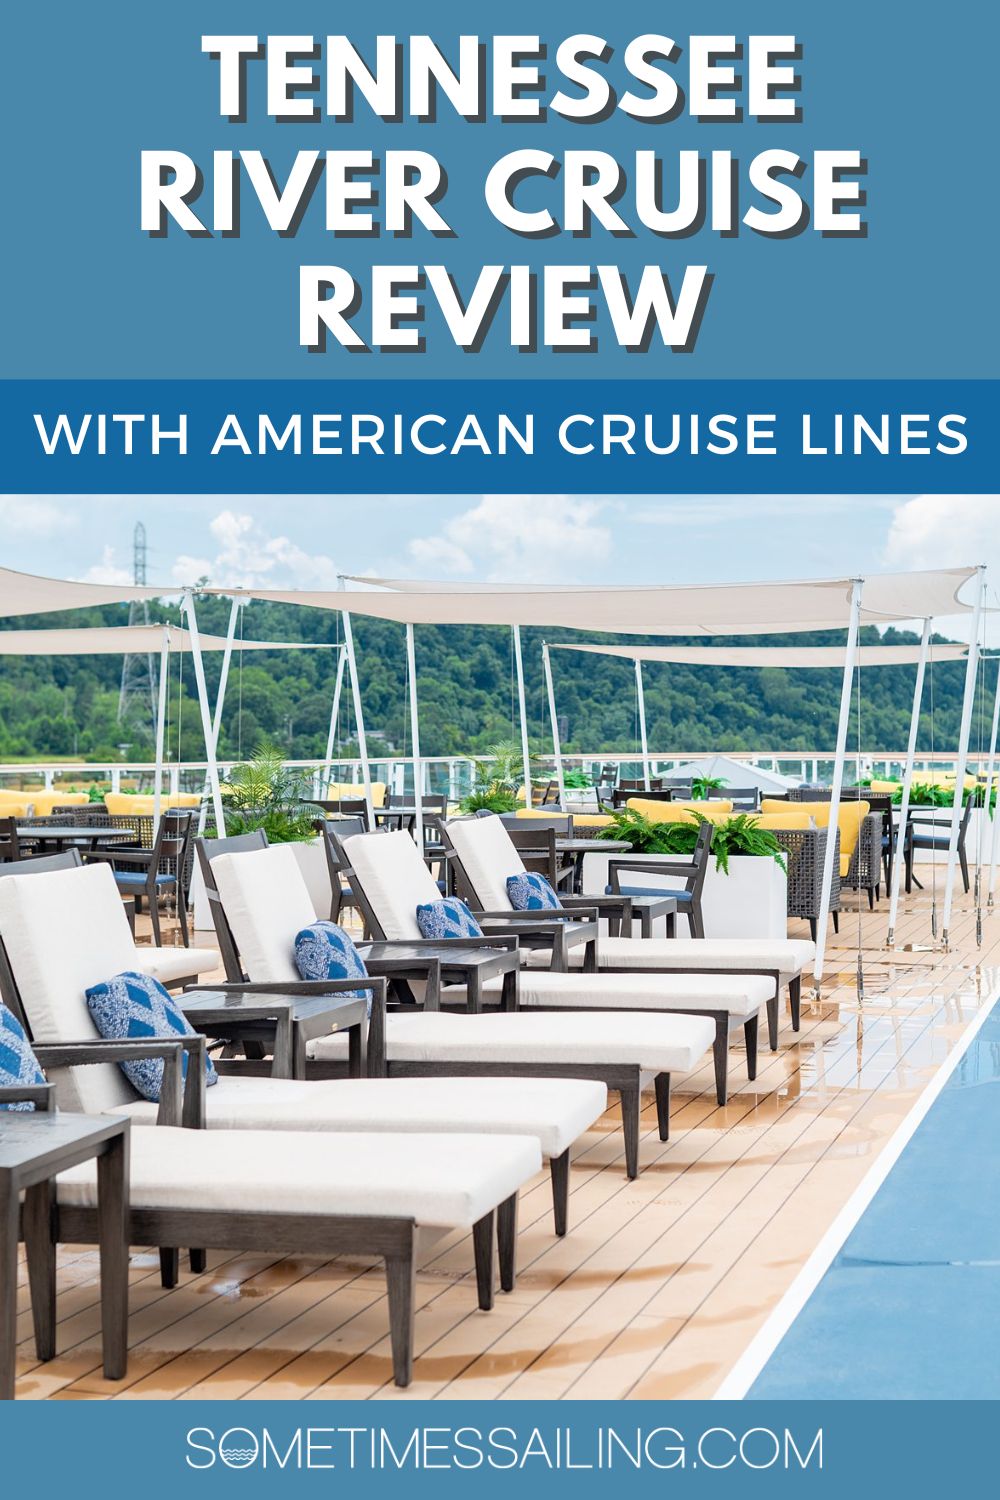 Tennesse River Cruise Review with American Cruise Lines with lounge chairs on the top deck of the ship.